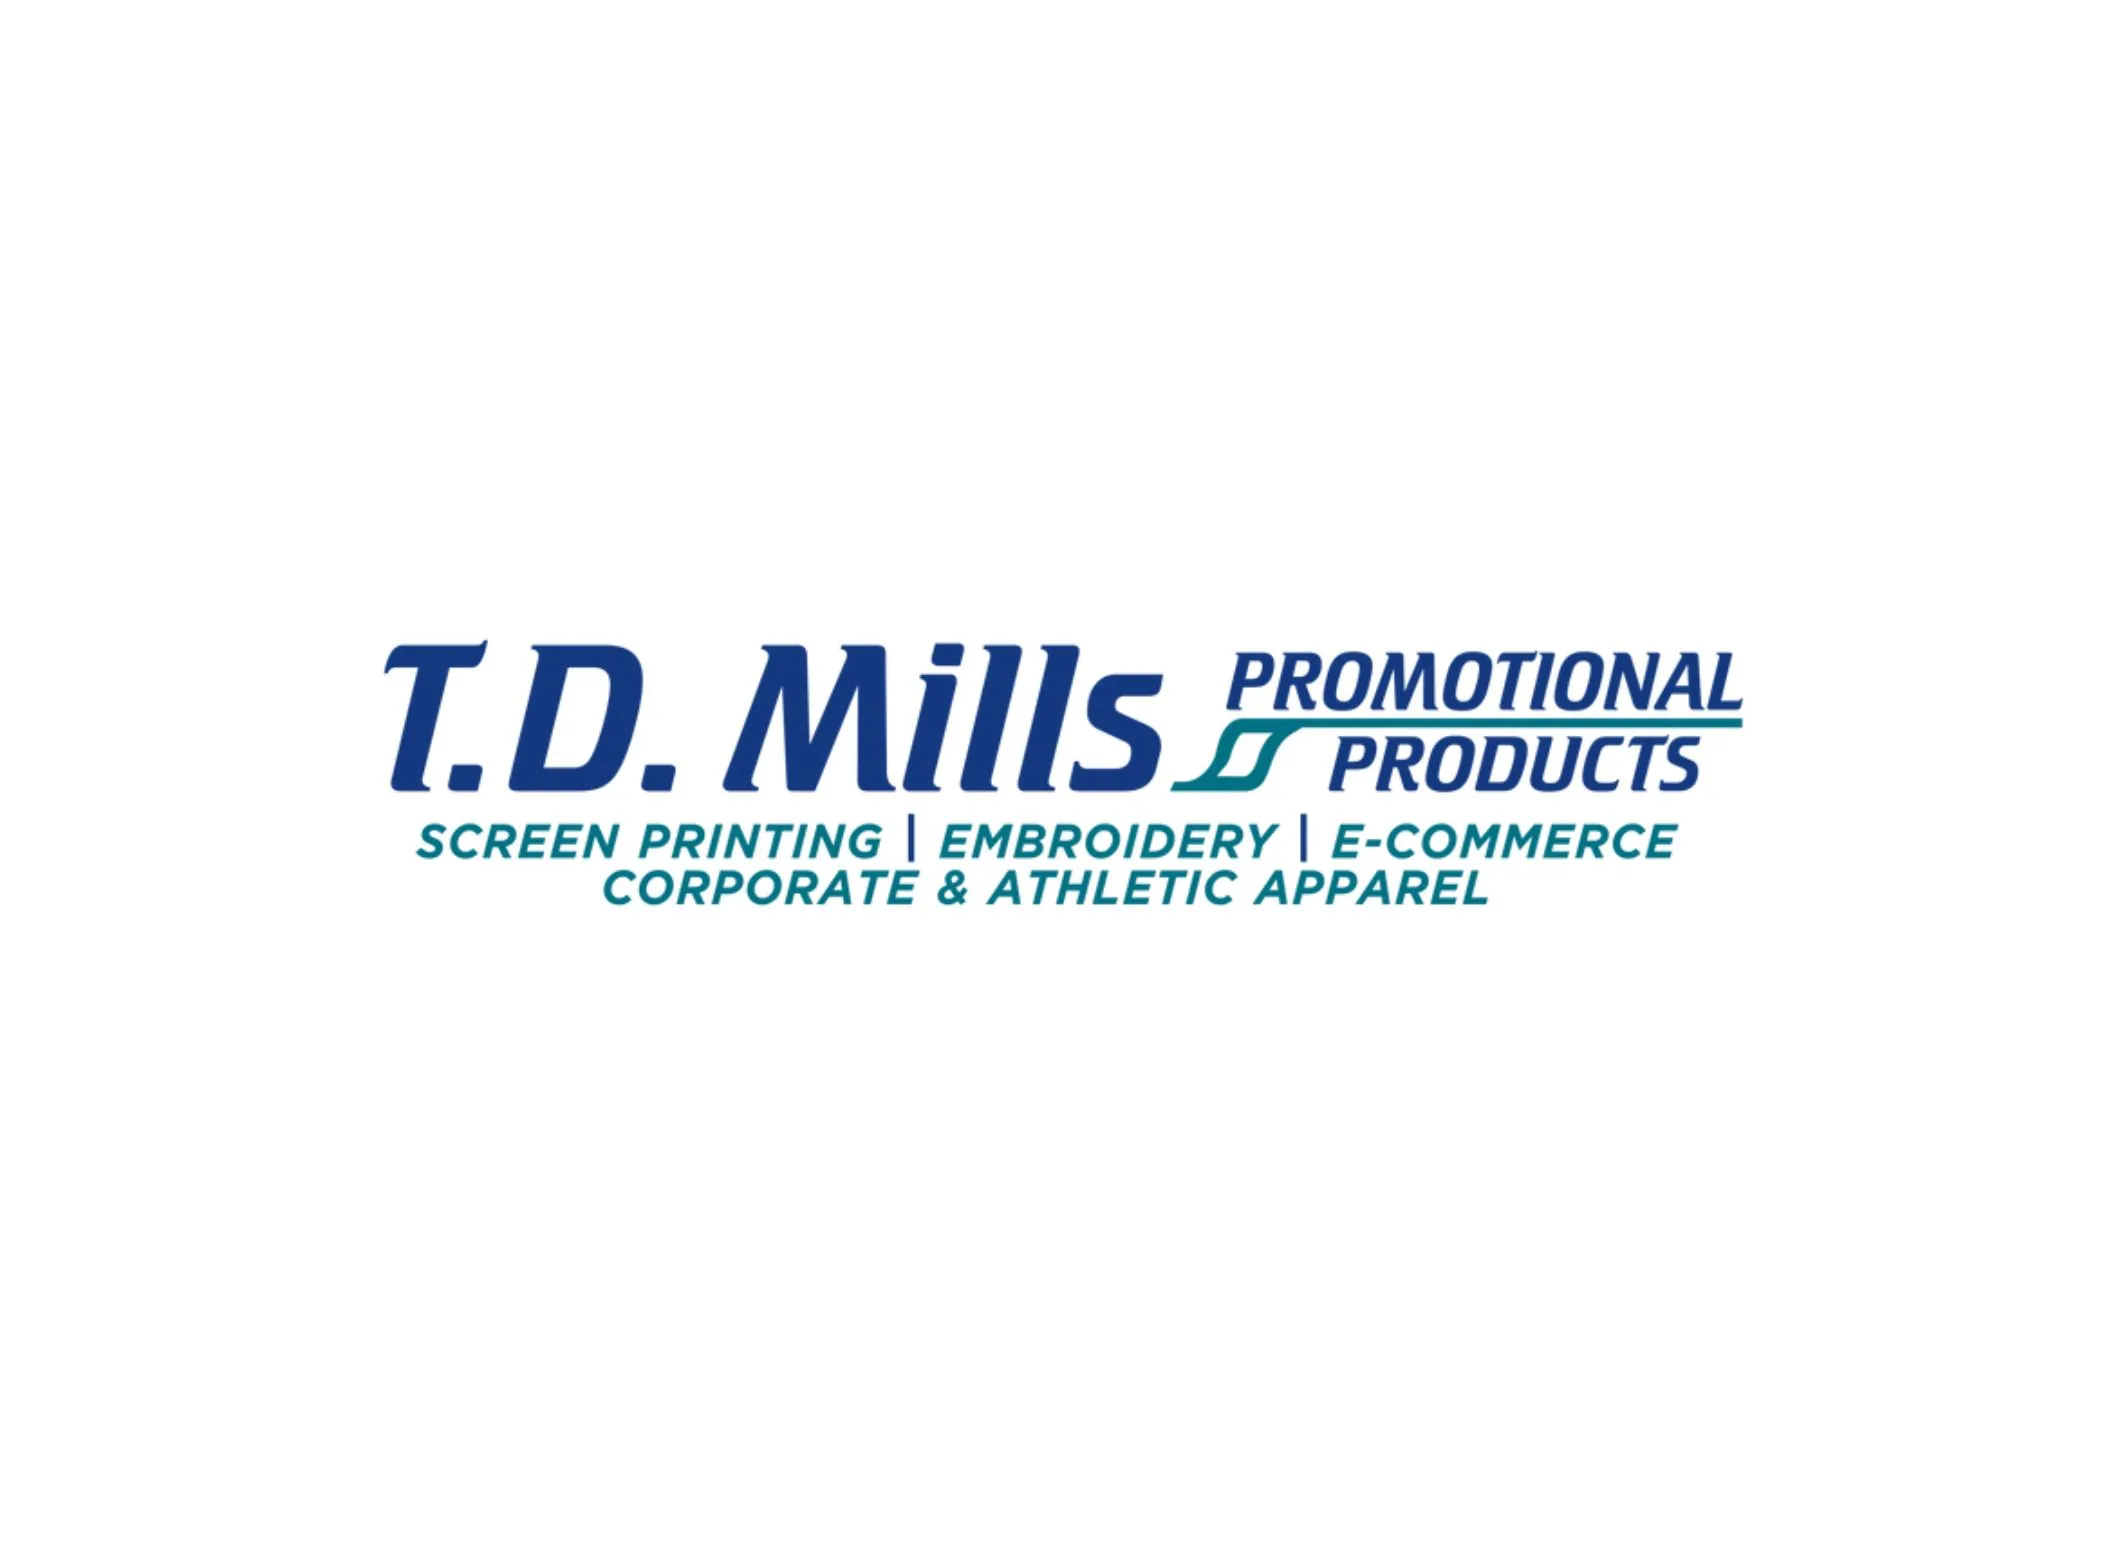 T.D. Mills Promotional Products logo